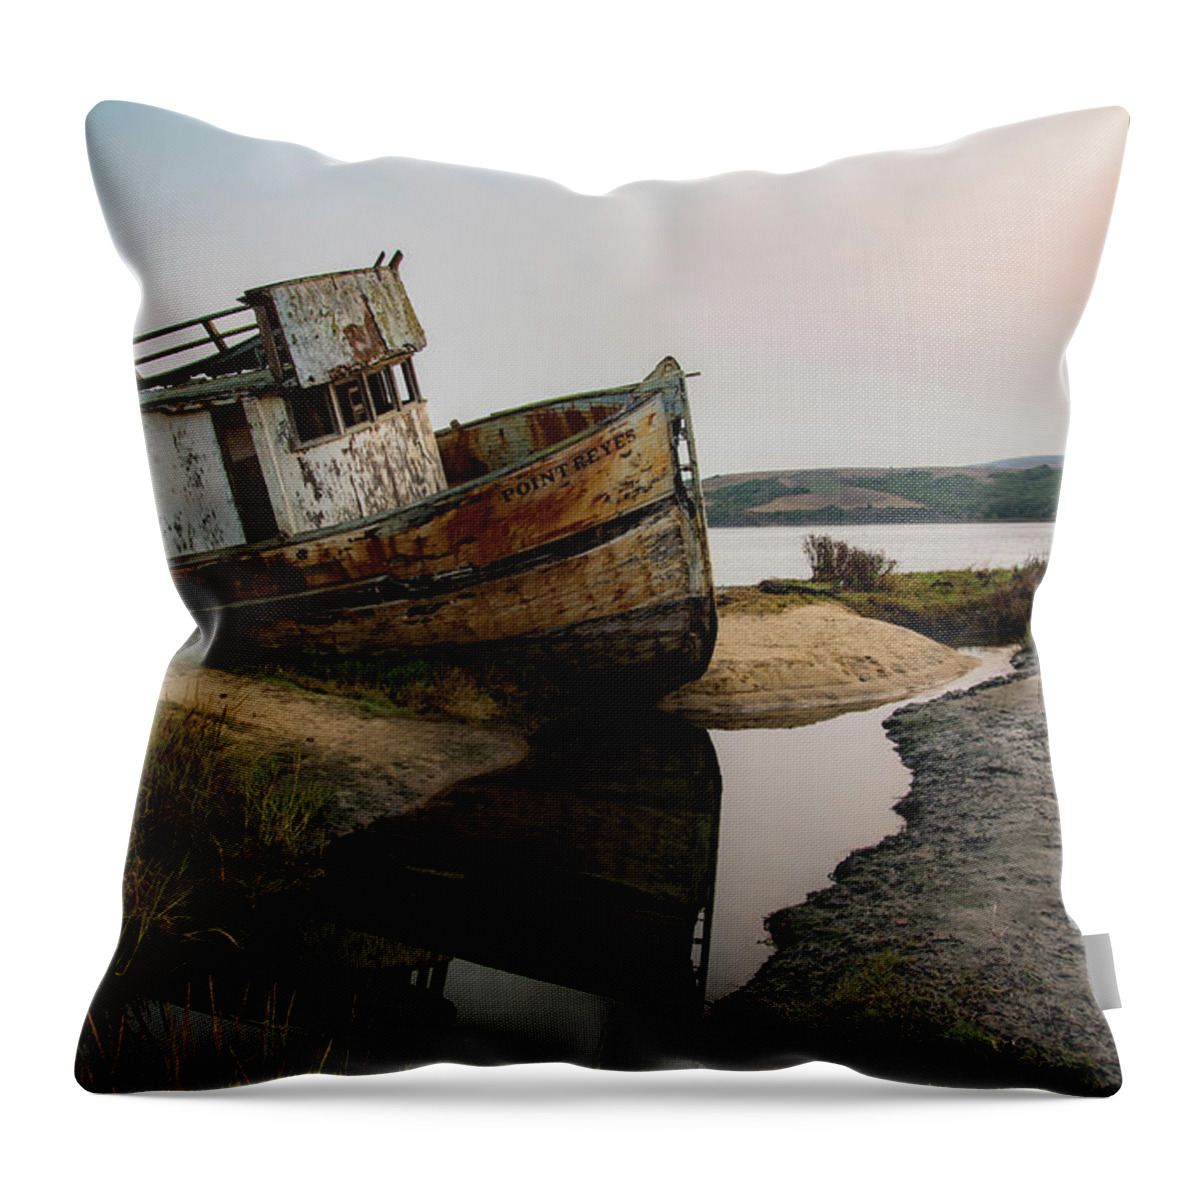  Throw Pillow featuring the photograph Pt. Reyes Shipwreck 4 by Wendy Carrington